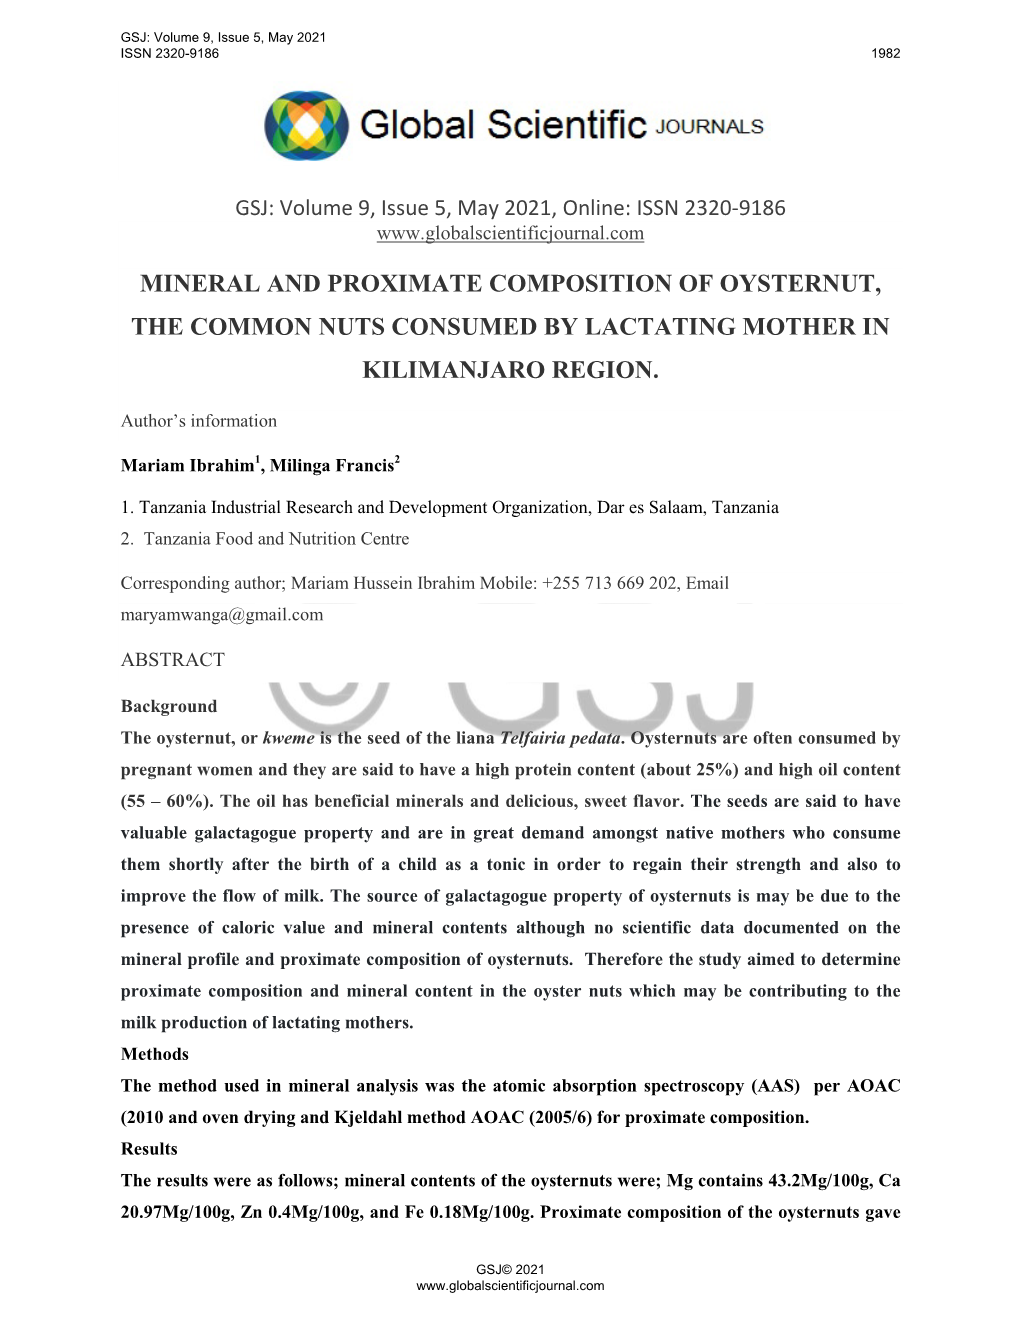 Mineral and Proximate Composition of Oysternut, the Common Nuts Consumed by Lactating Mother in Kilimanjaro Region